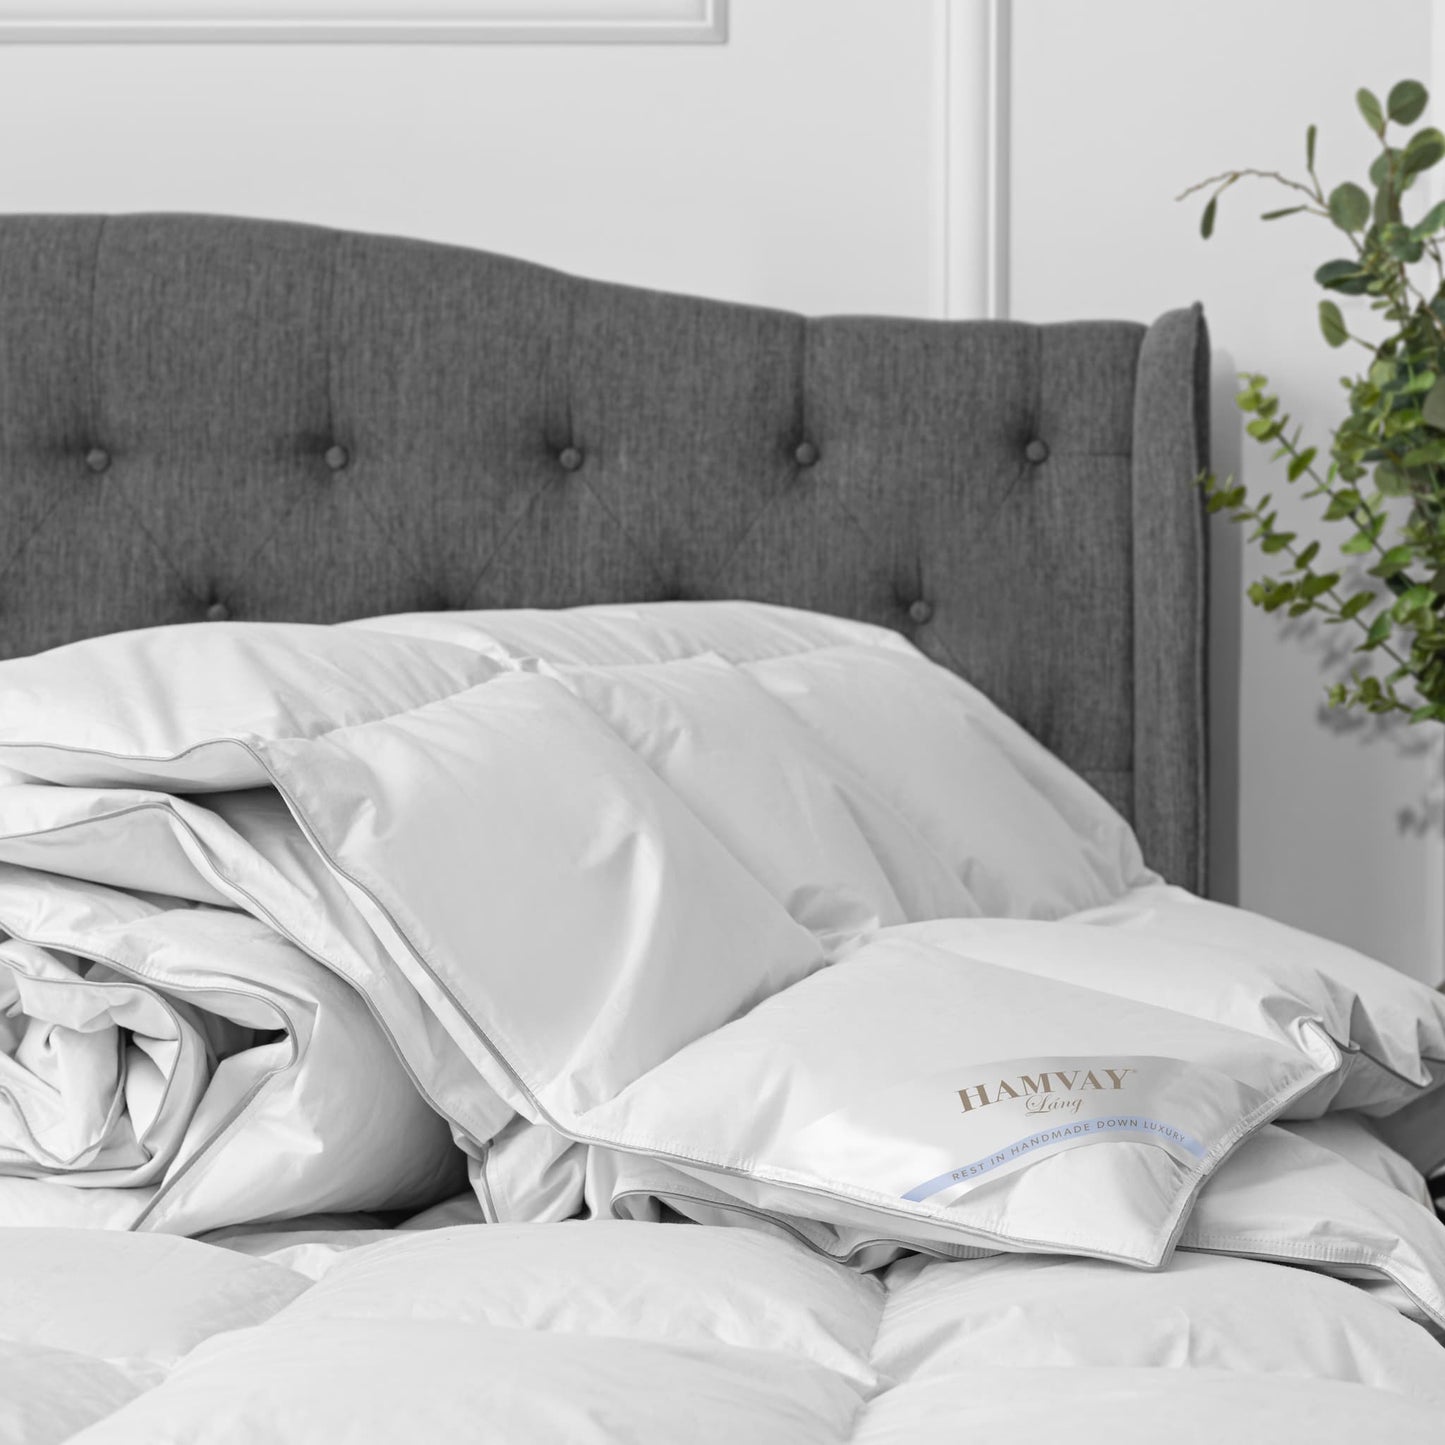 A luxurious Hungarian goose down comforter losely spread over a grey bed